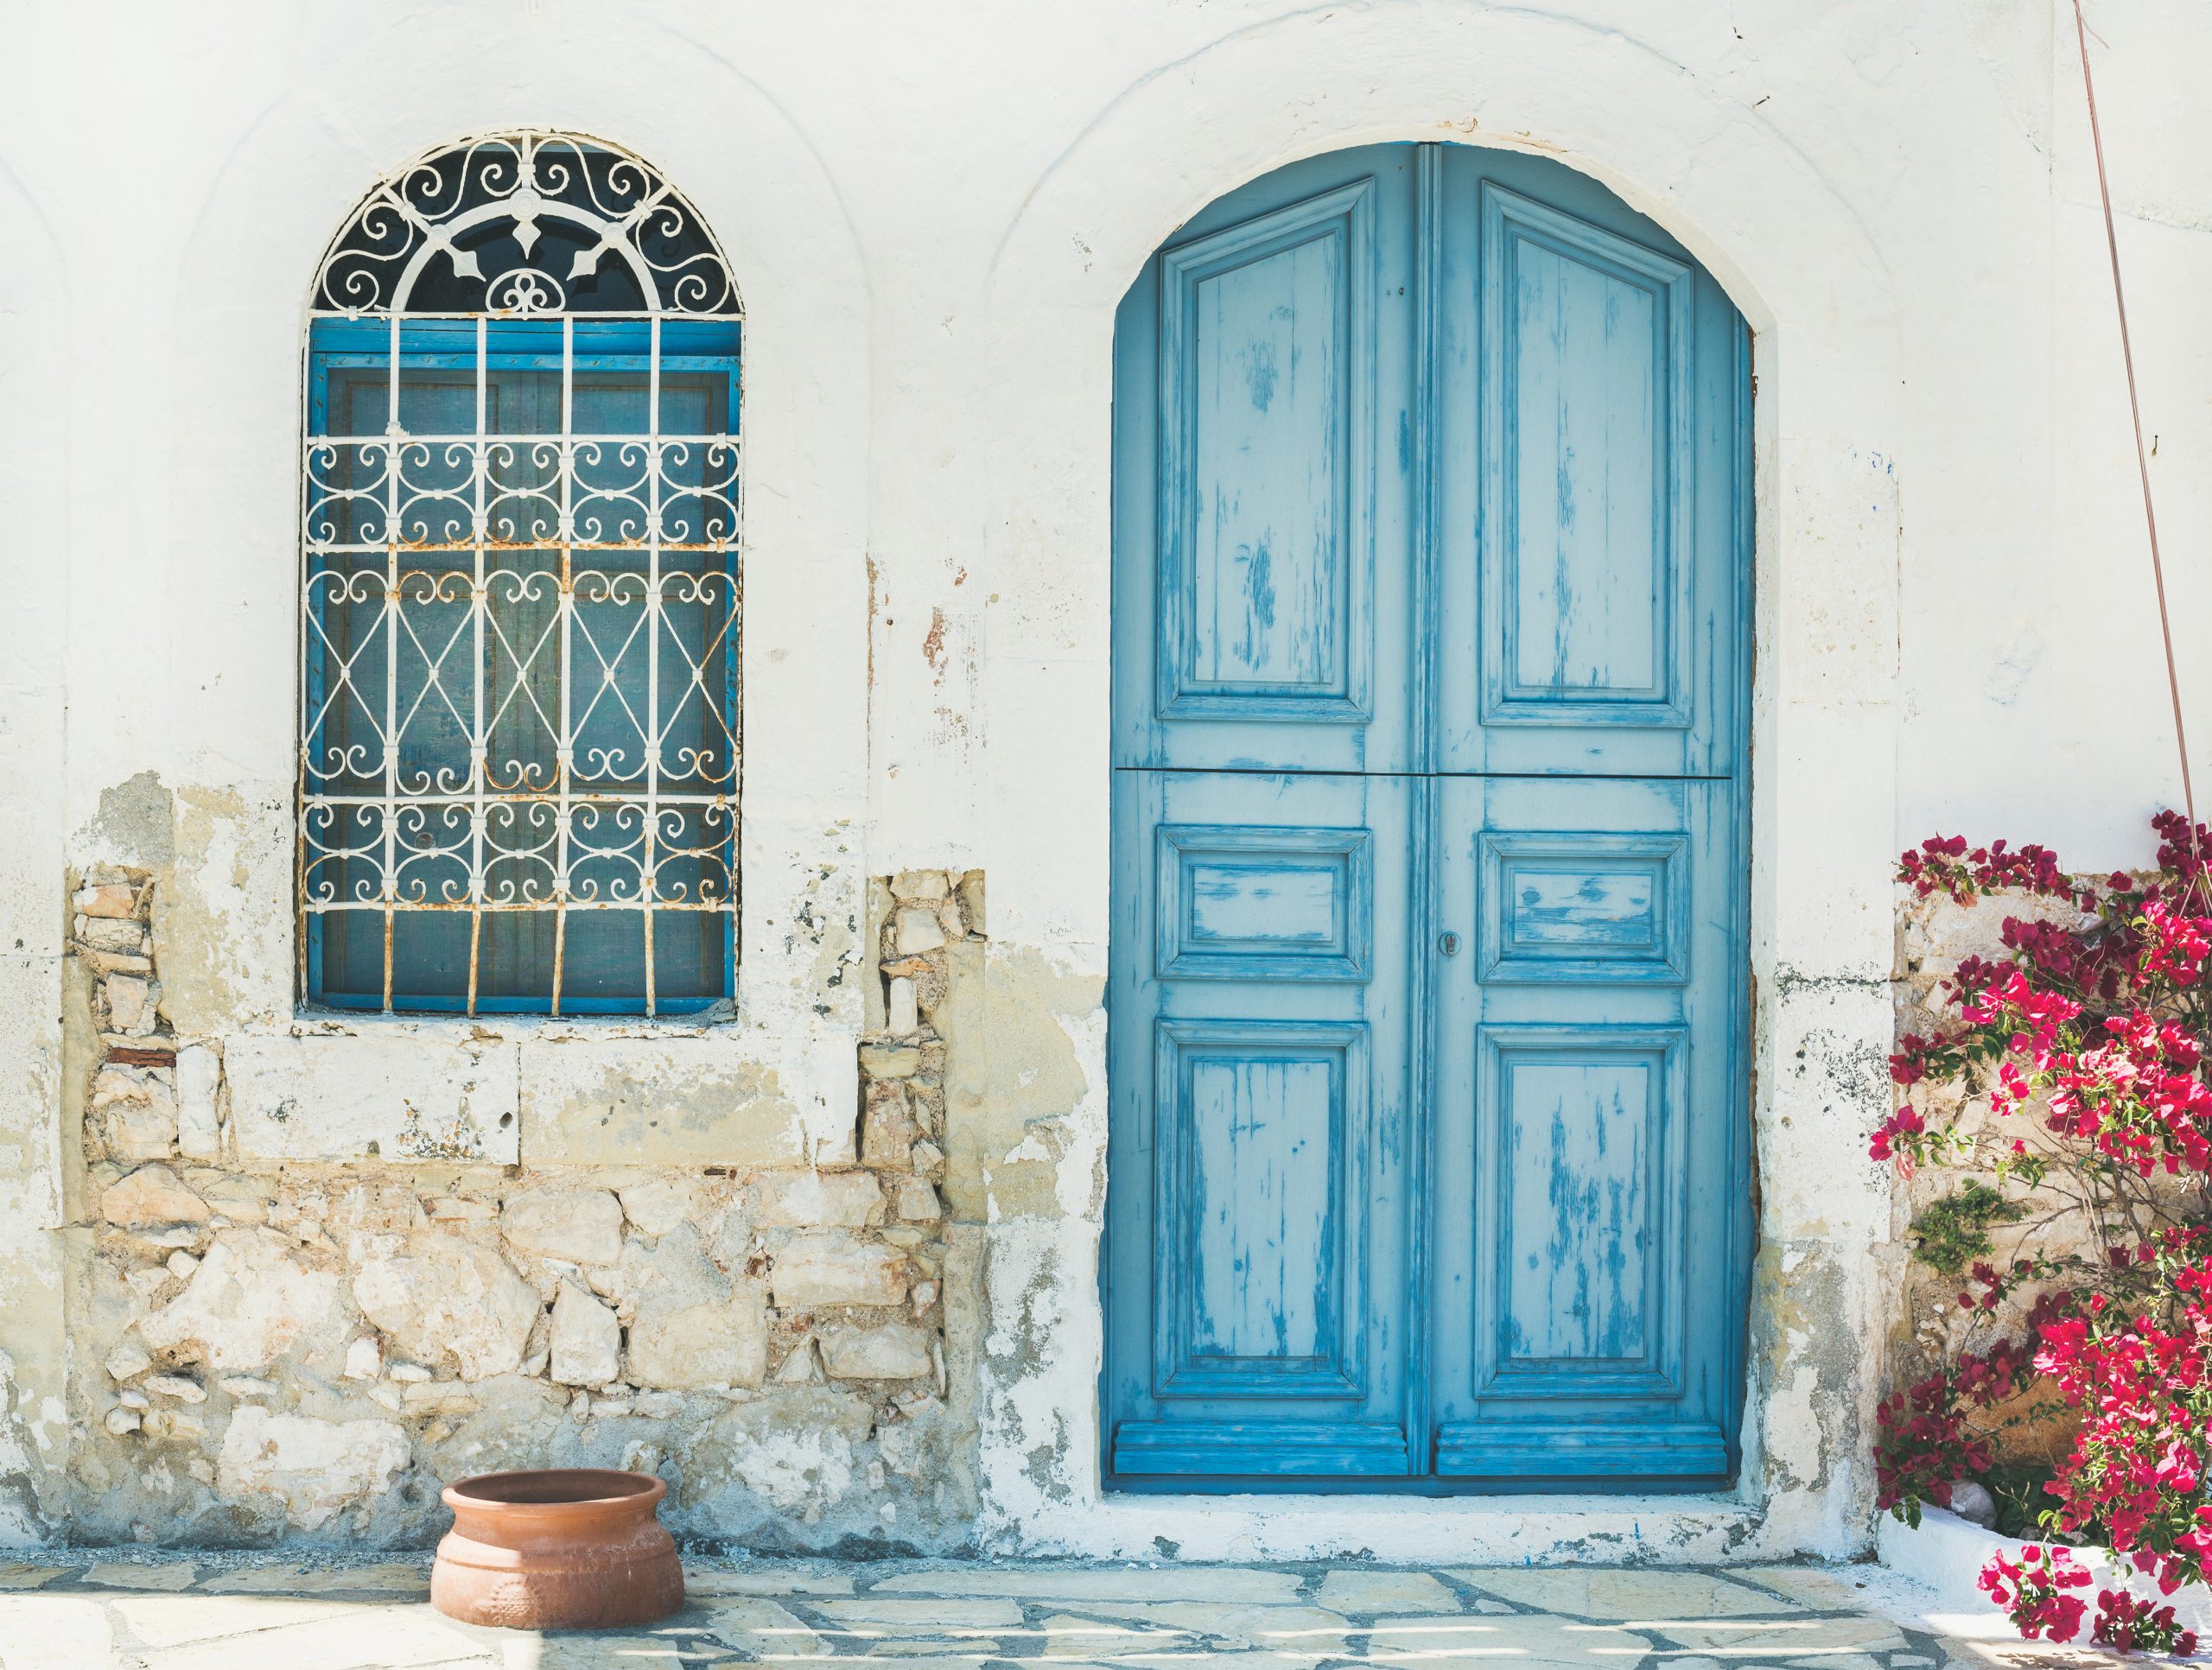 Typical exterior of Greek traditional town street with colorful buildings and marine blue door on Kastelorizo Island, Dodecanese, Greece, Europe